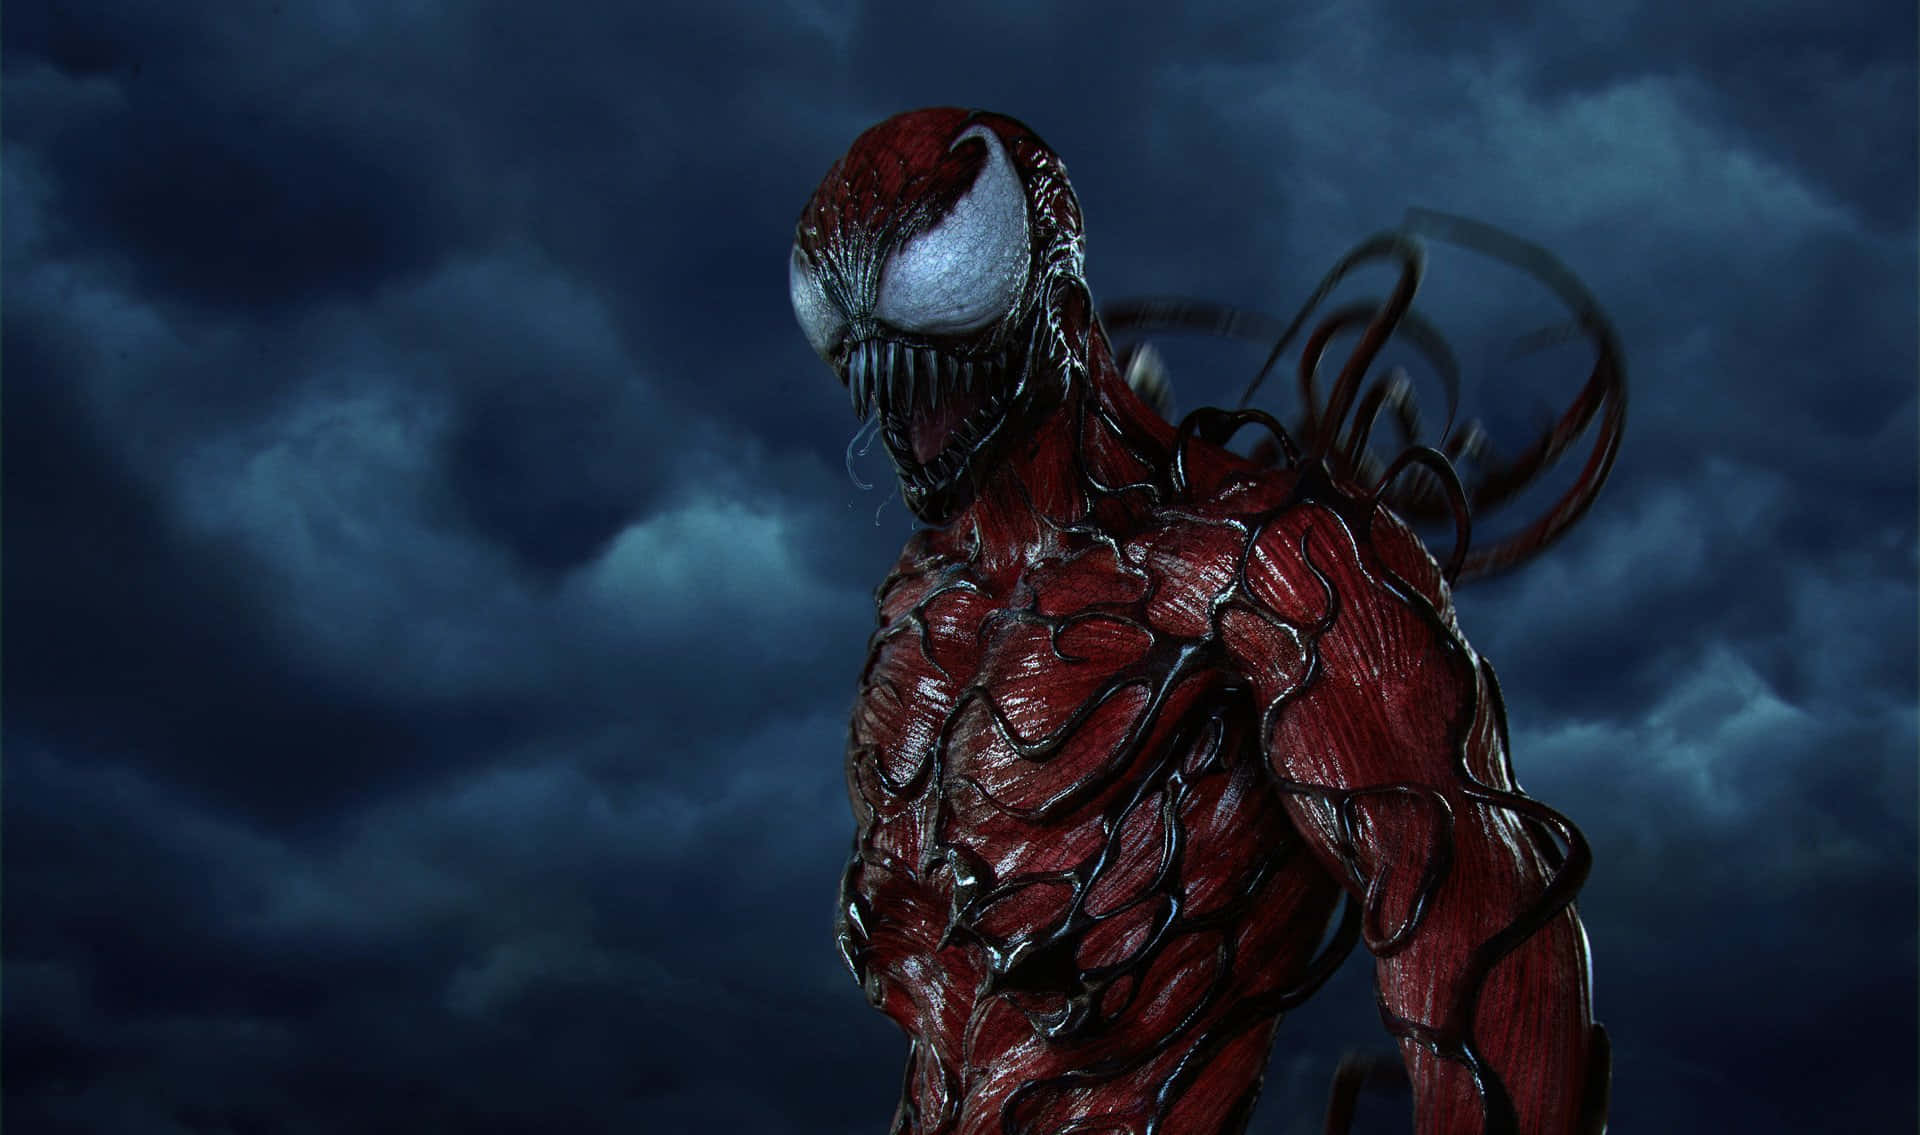 Carnage Unleashed - Comic Book Villain in Action